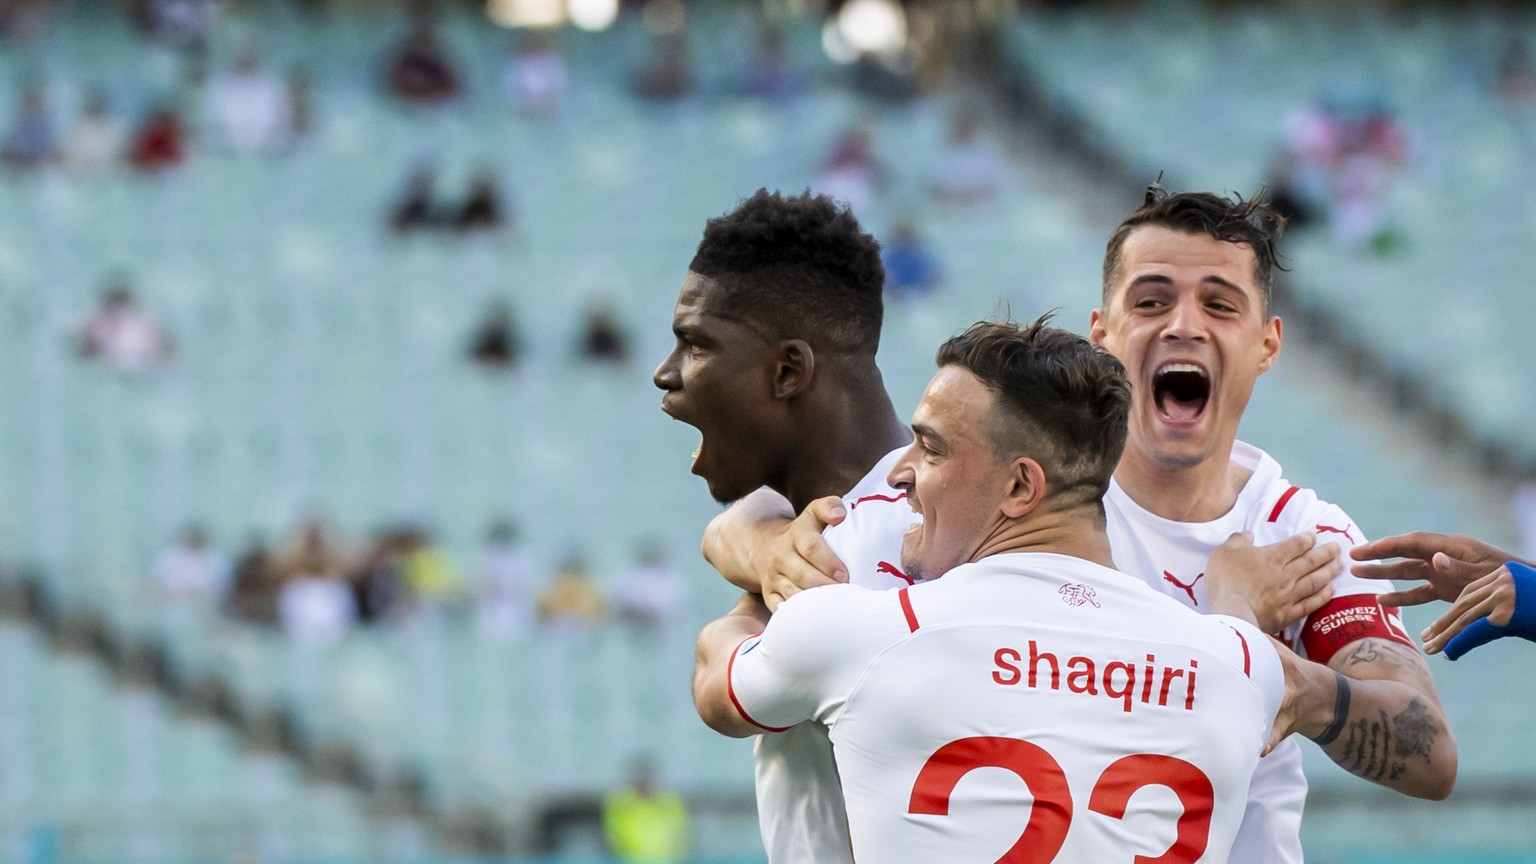 Switzerland's forward Breel Embolo, left, celebrates his goal with Switzerland's midfielder Xherdan Shaqiri and Switzerland's midfielder Granit Xhaka during the Euro 2020 soccer tournament group A mat ...